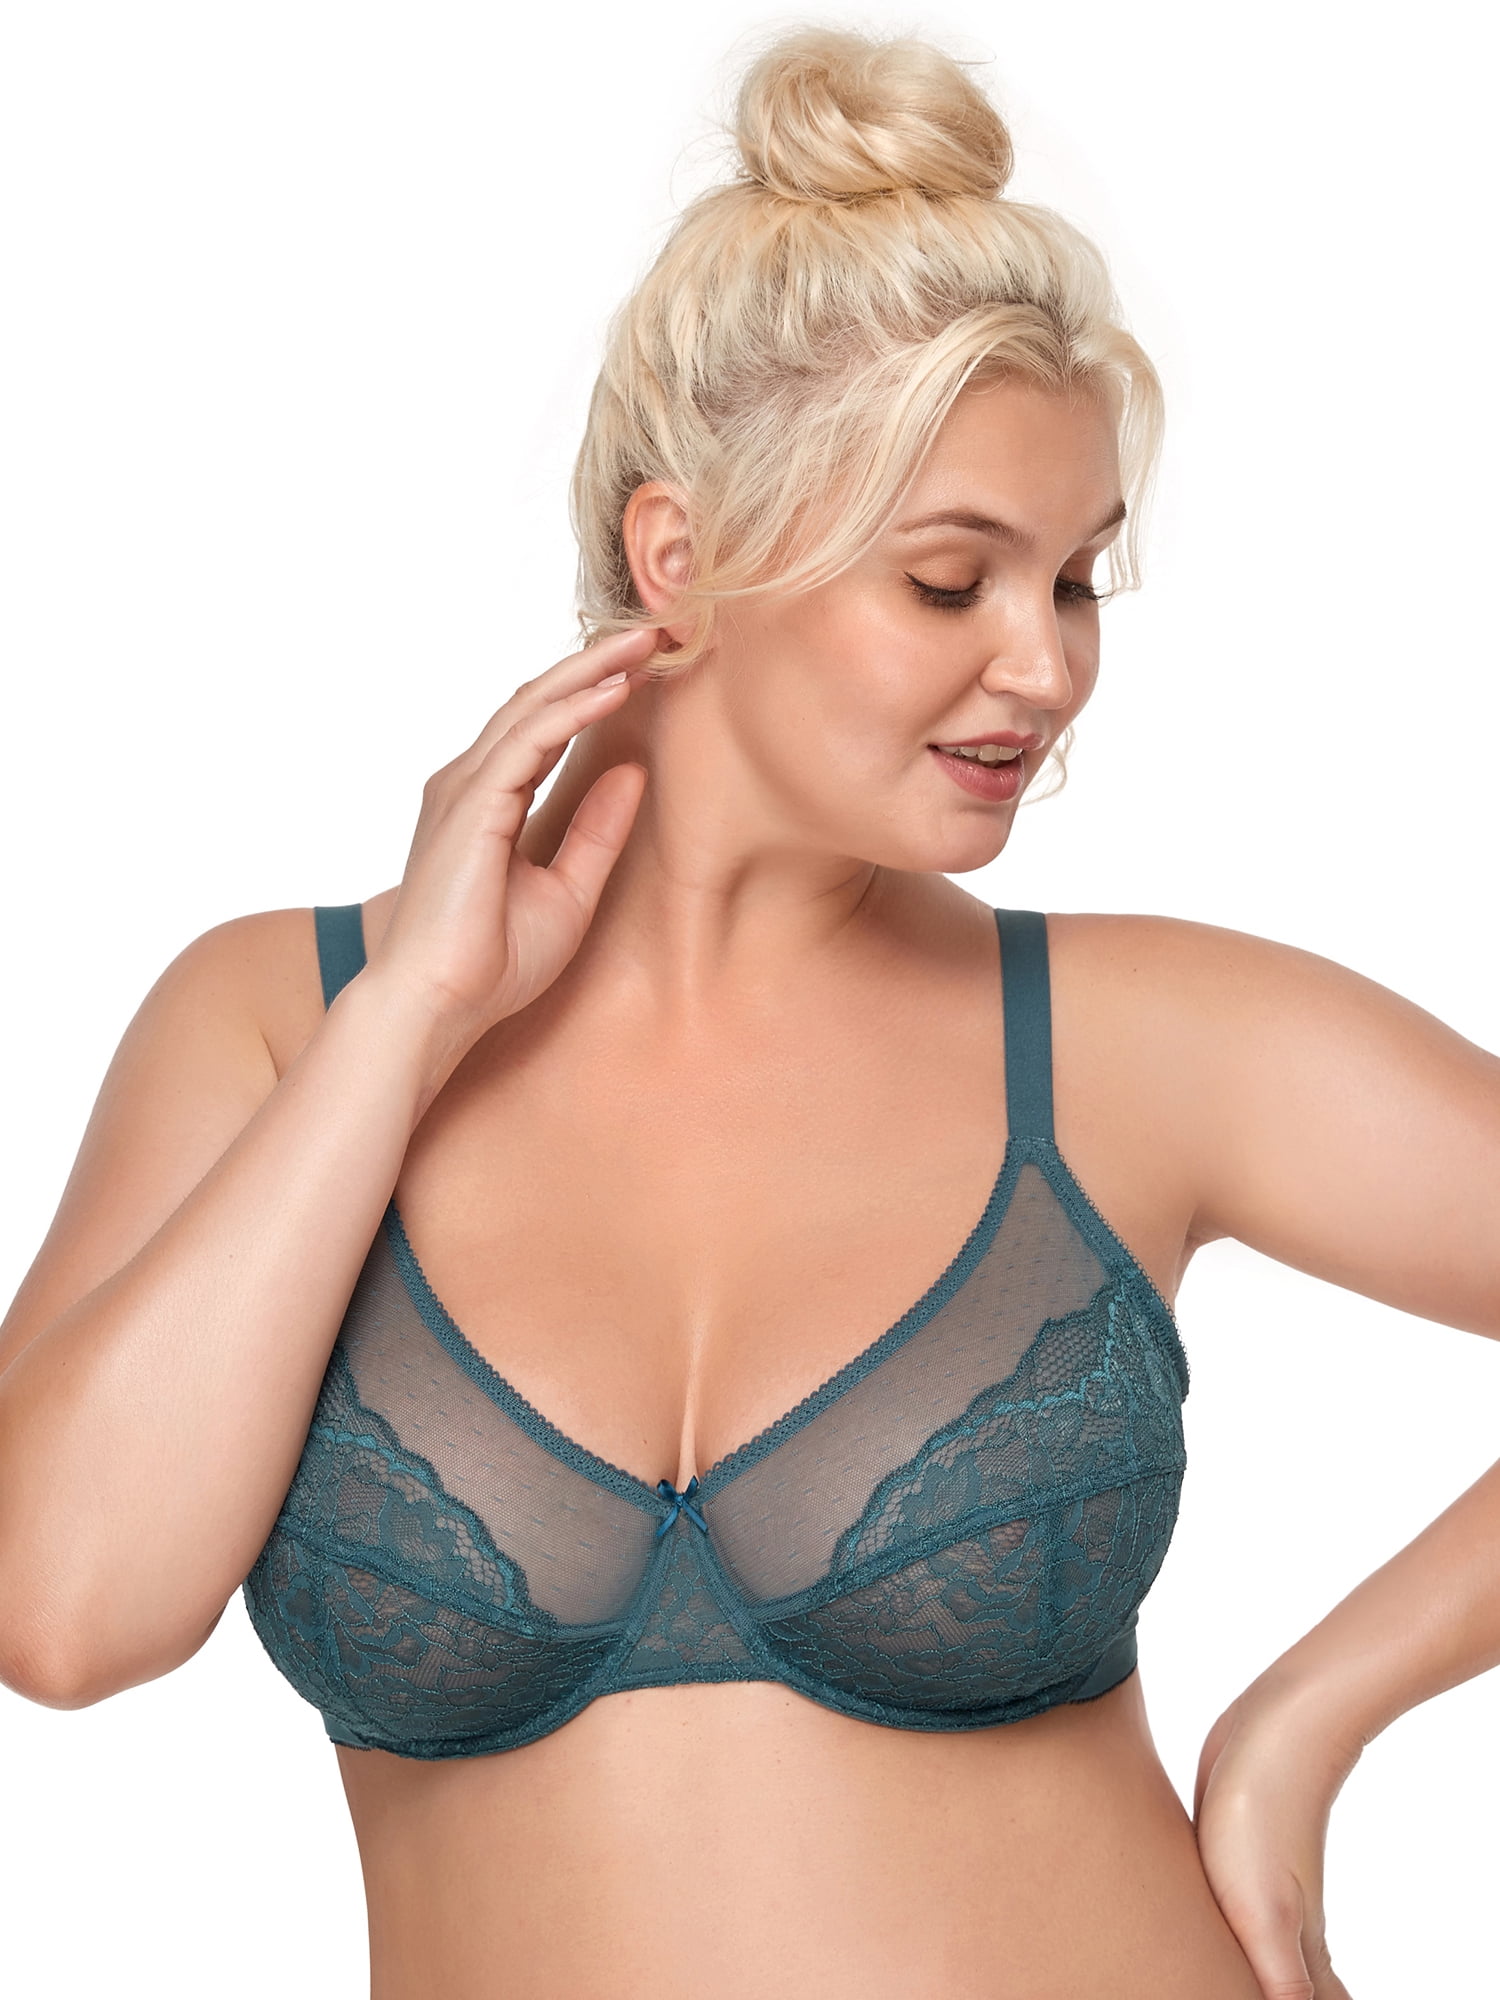 HSIA Plus Size Bras for Women Full Coverage Back Fat Underwire Unlined Bras  Balsam Blue 46D 